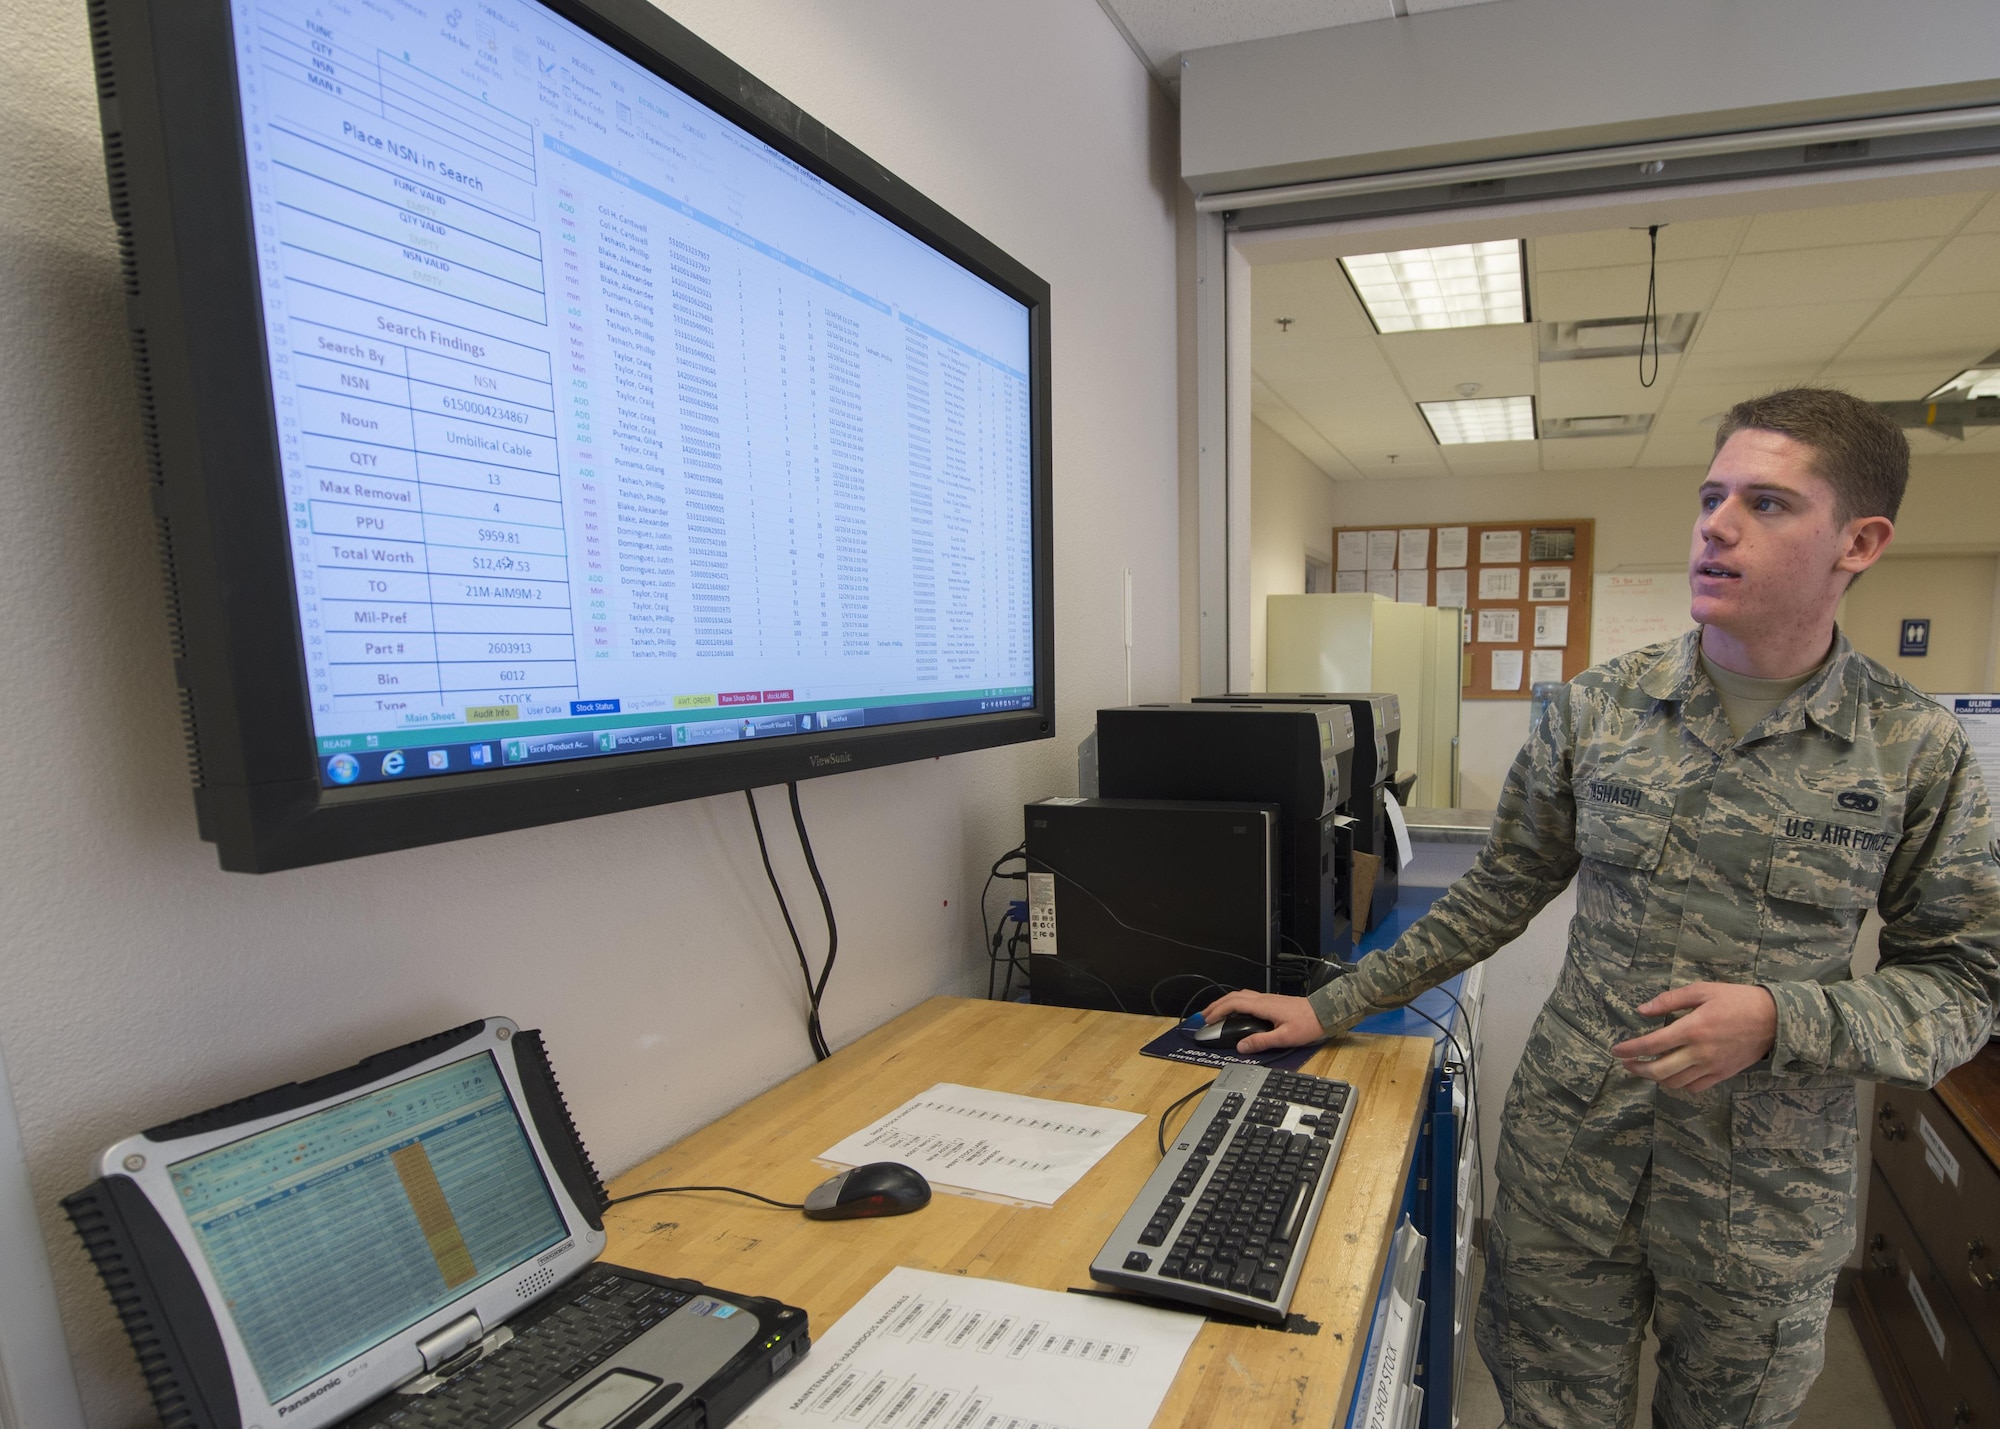 Airman Phillip Tashash, a 49th Maintenance Squadron munitions specialist, does an inventory transaction using the Automated Supply Accountability Program, Jan. 9, 2017, at Holloman Air Force Base, N.M. The ASAP is a new program that Holloman’s AMMO flight uses to track quantity and prices of assets. Tashash created the program, which allows personnel to perform accurate transactions in 10 seconds, rather than five minutes with the old system. (U.S. Air Force photo by Senior Airman Emily Kenney)